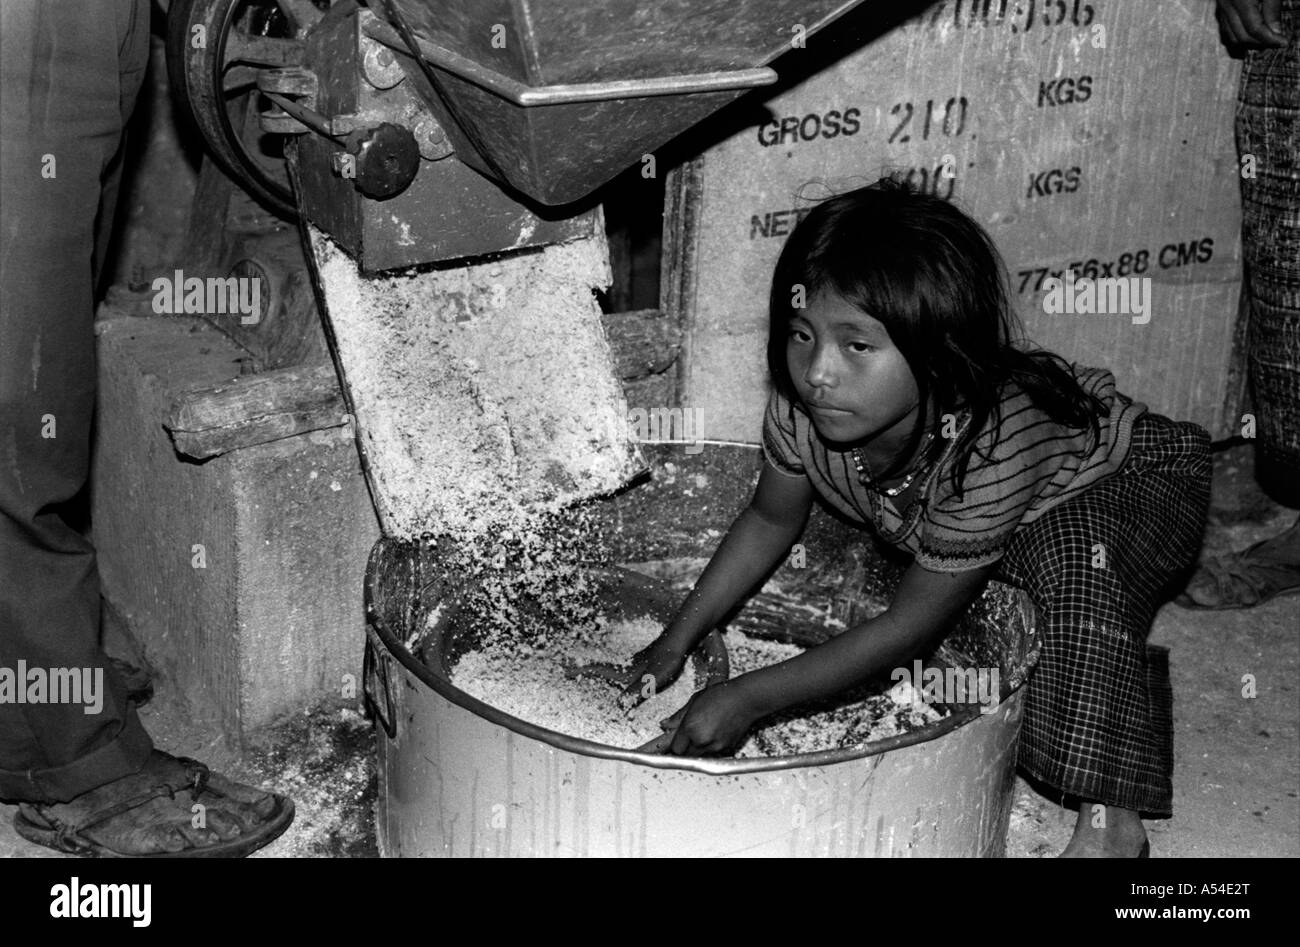 Painet hn1970 568 black and white child labor girl milling corn for tortillas rabinal guatemala country developing nation Stock Photo